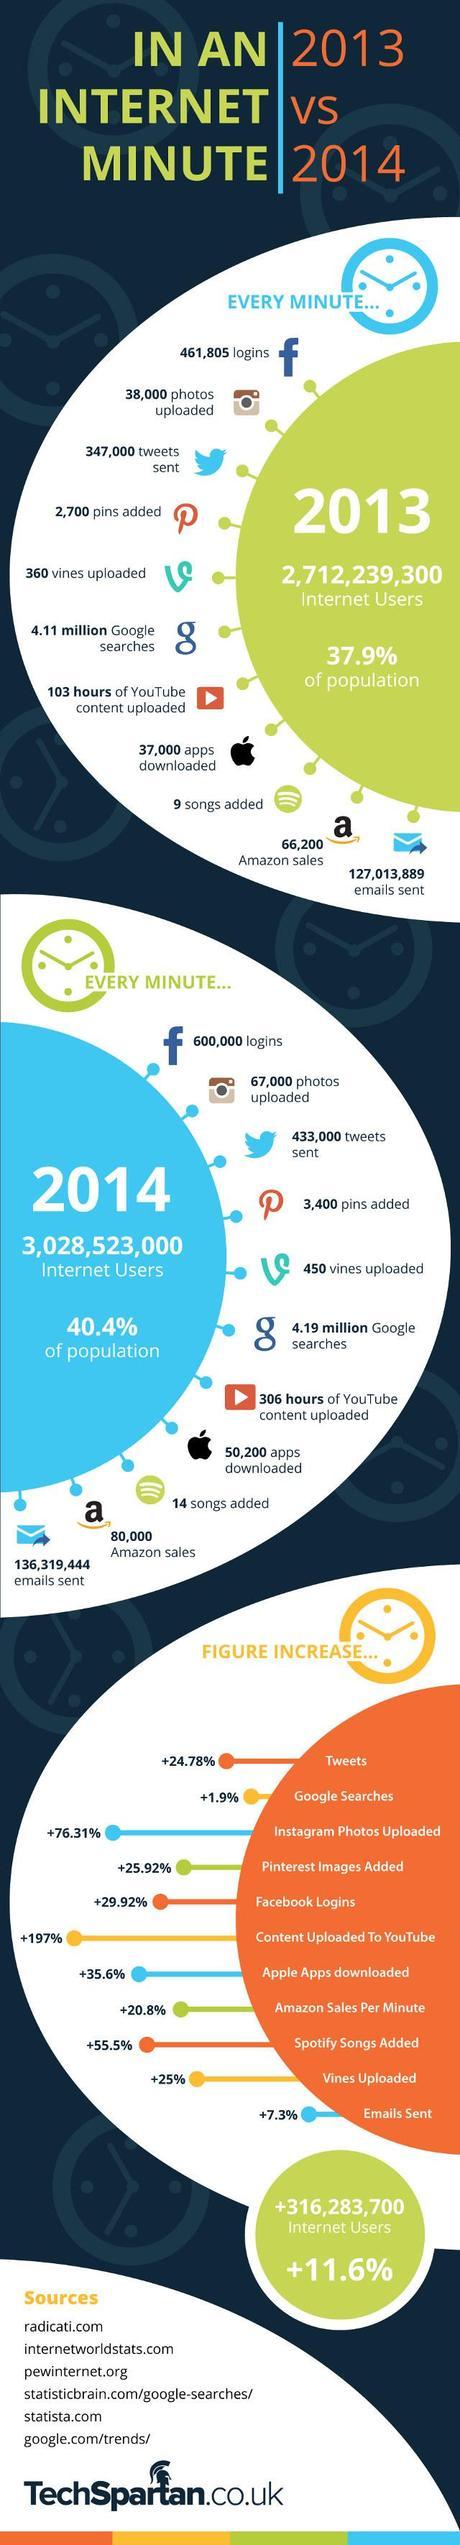 an-internet-minute-2014-infographic